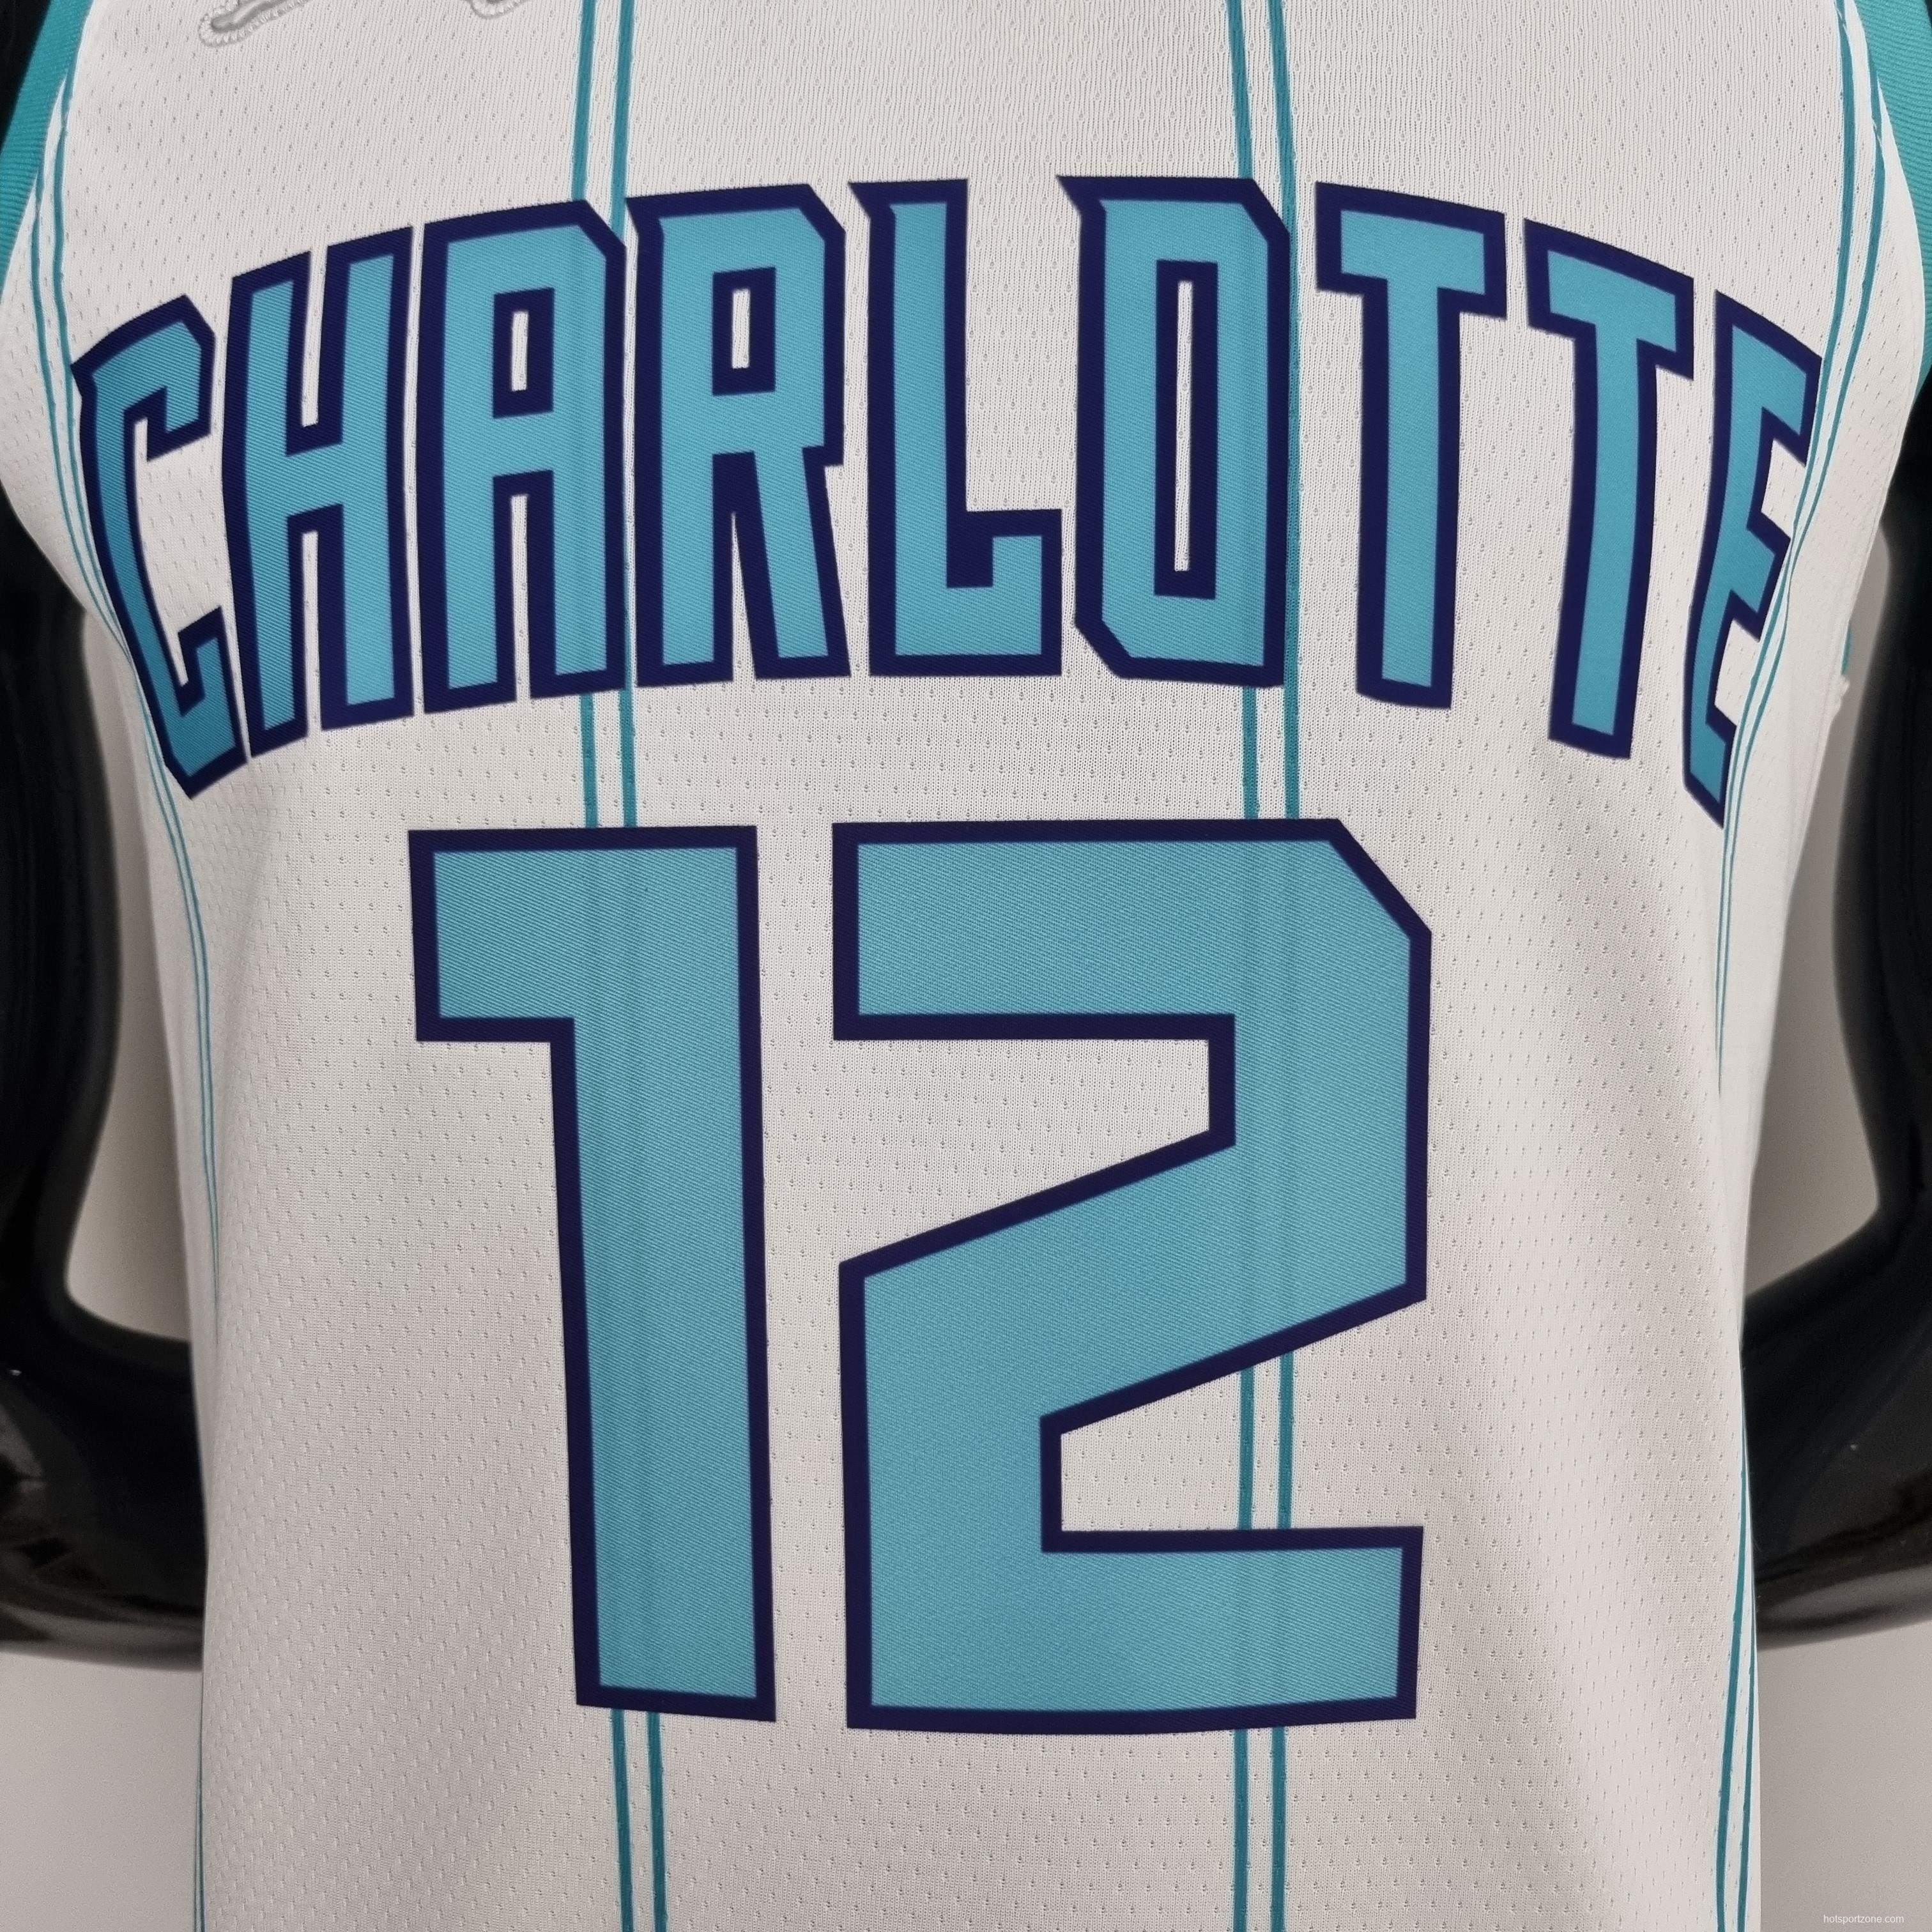 75th Anniversary Oubre #12 Charlotte Hornets White NBA Jersey